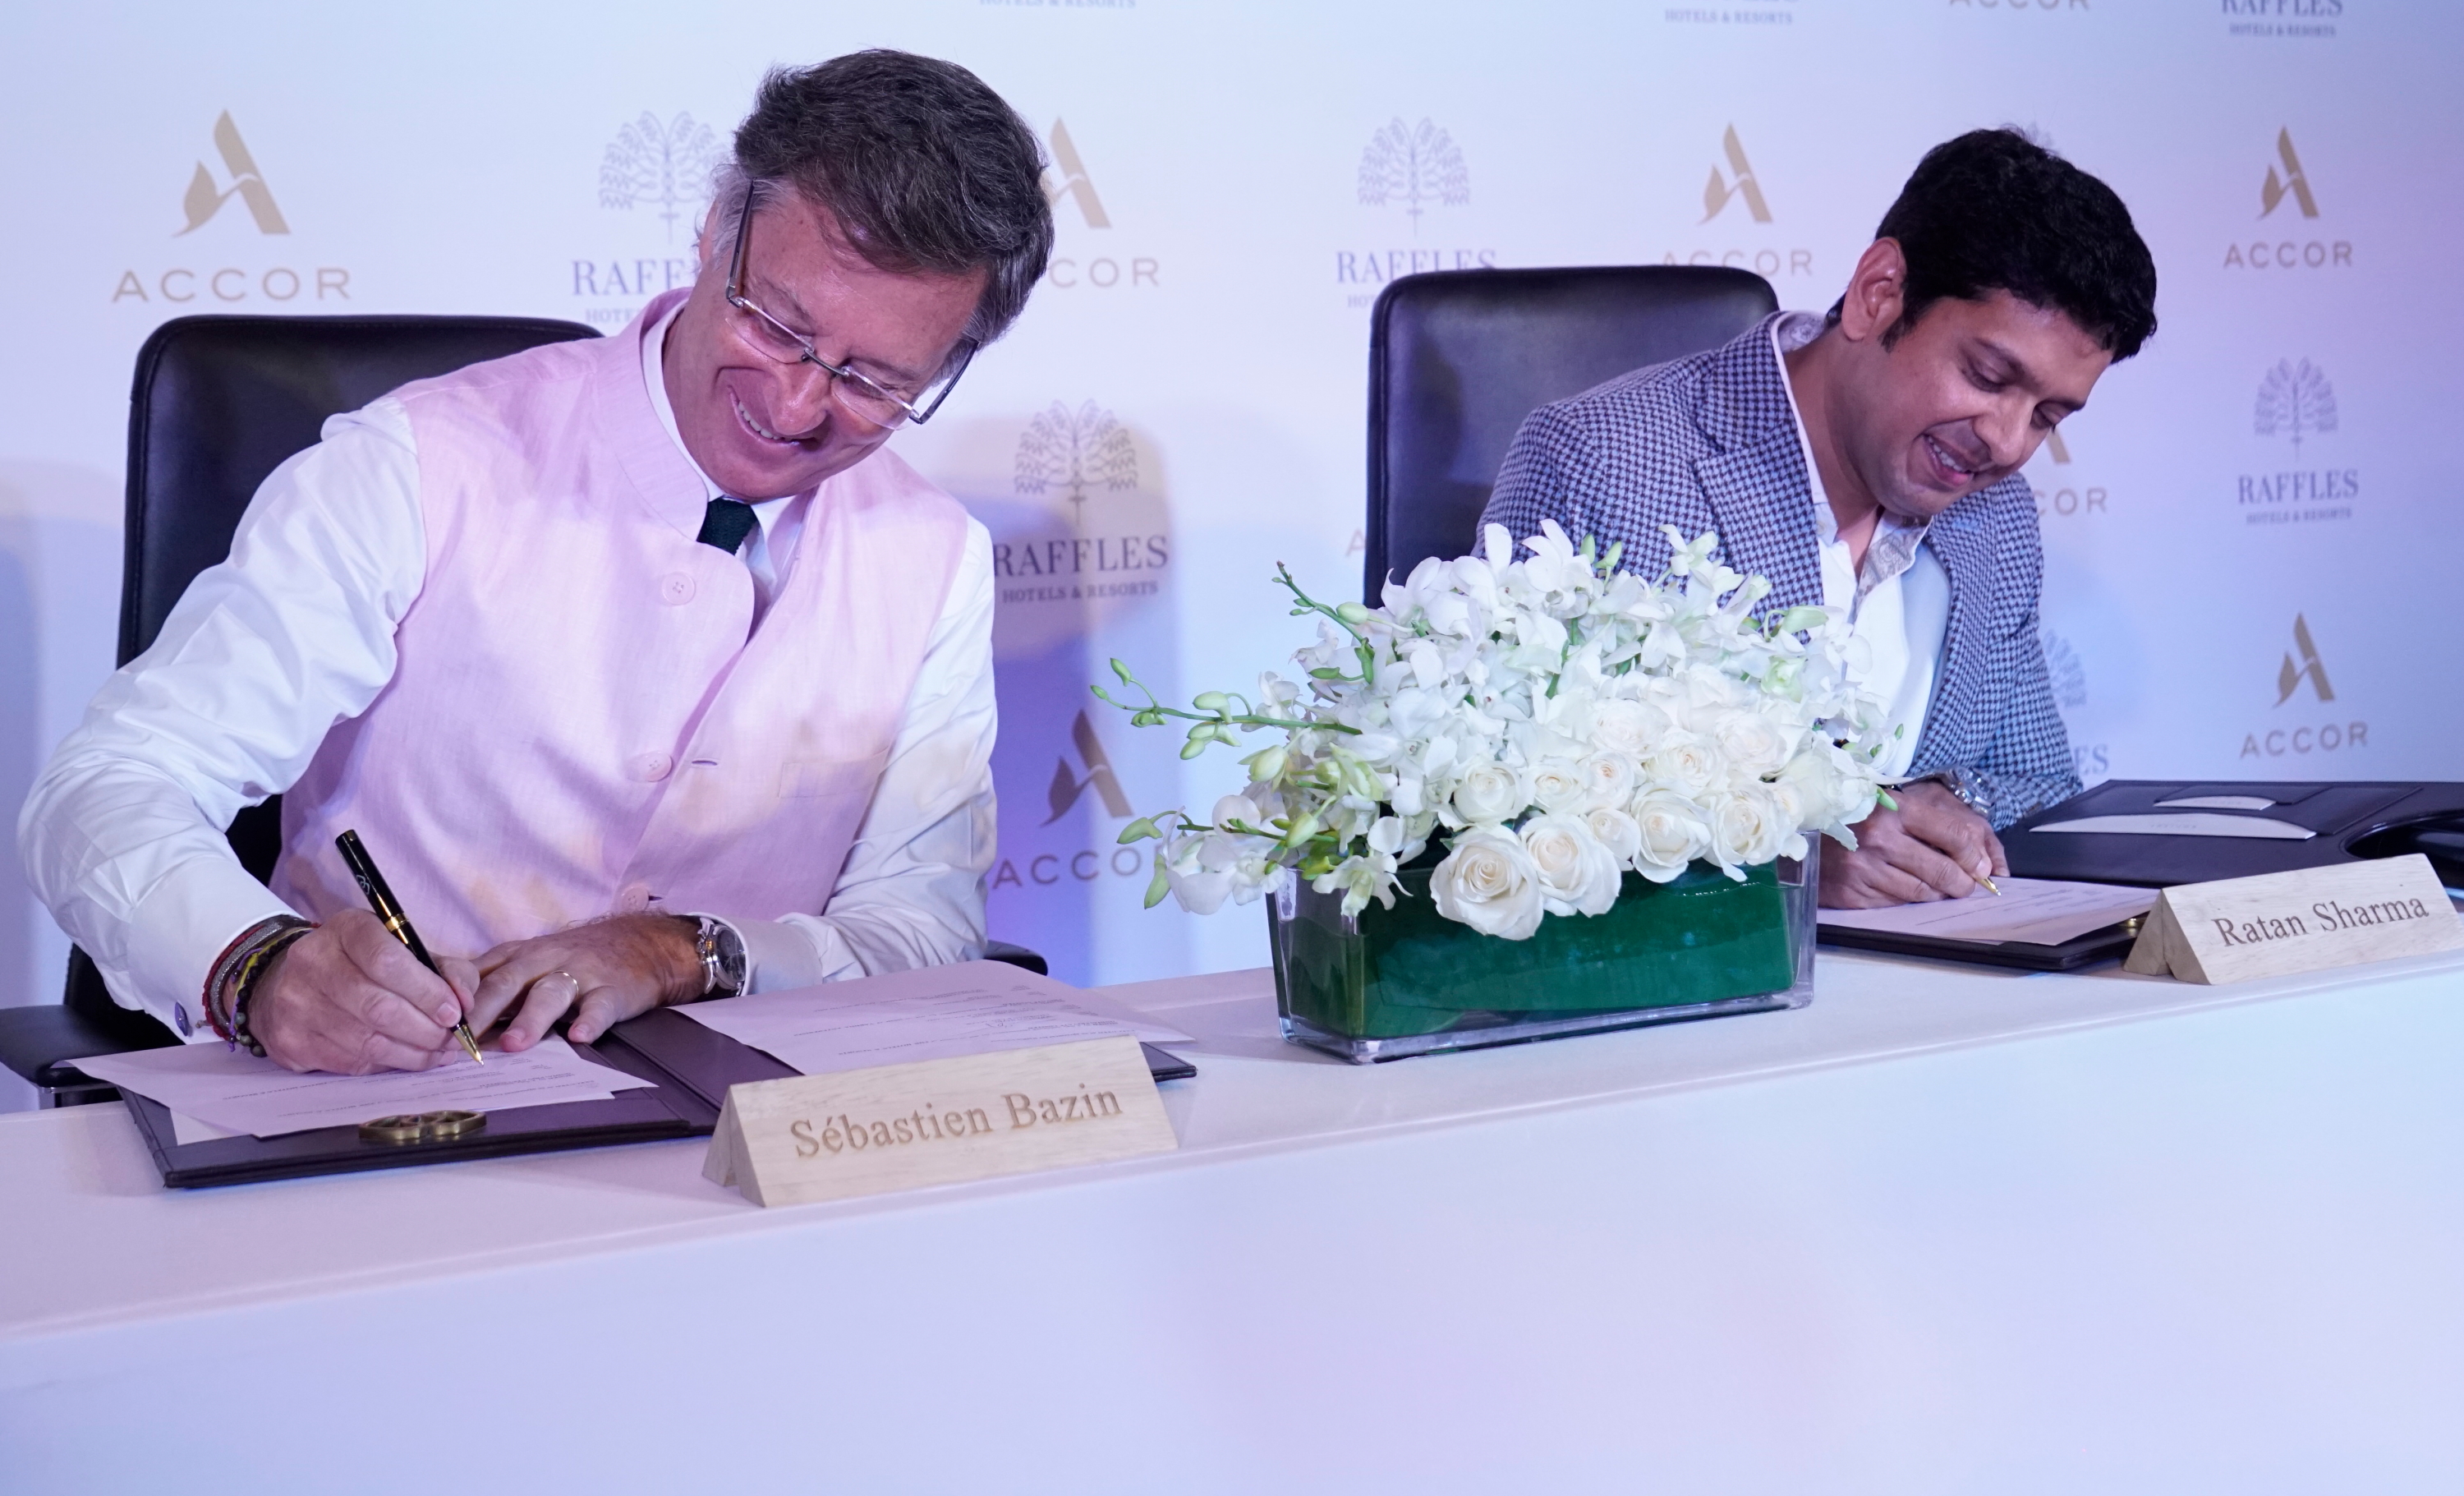 Sébastien Bazin, Chairman and CEO of Accor, signs the deal with owner, Ratankant Sharma Click to enlarge.